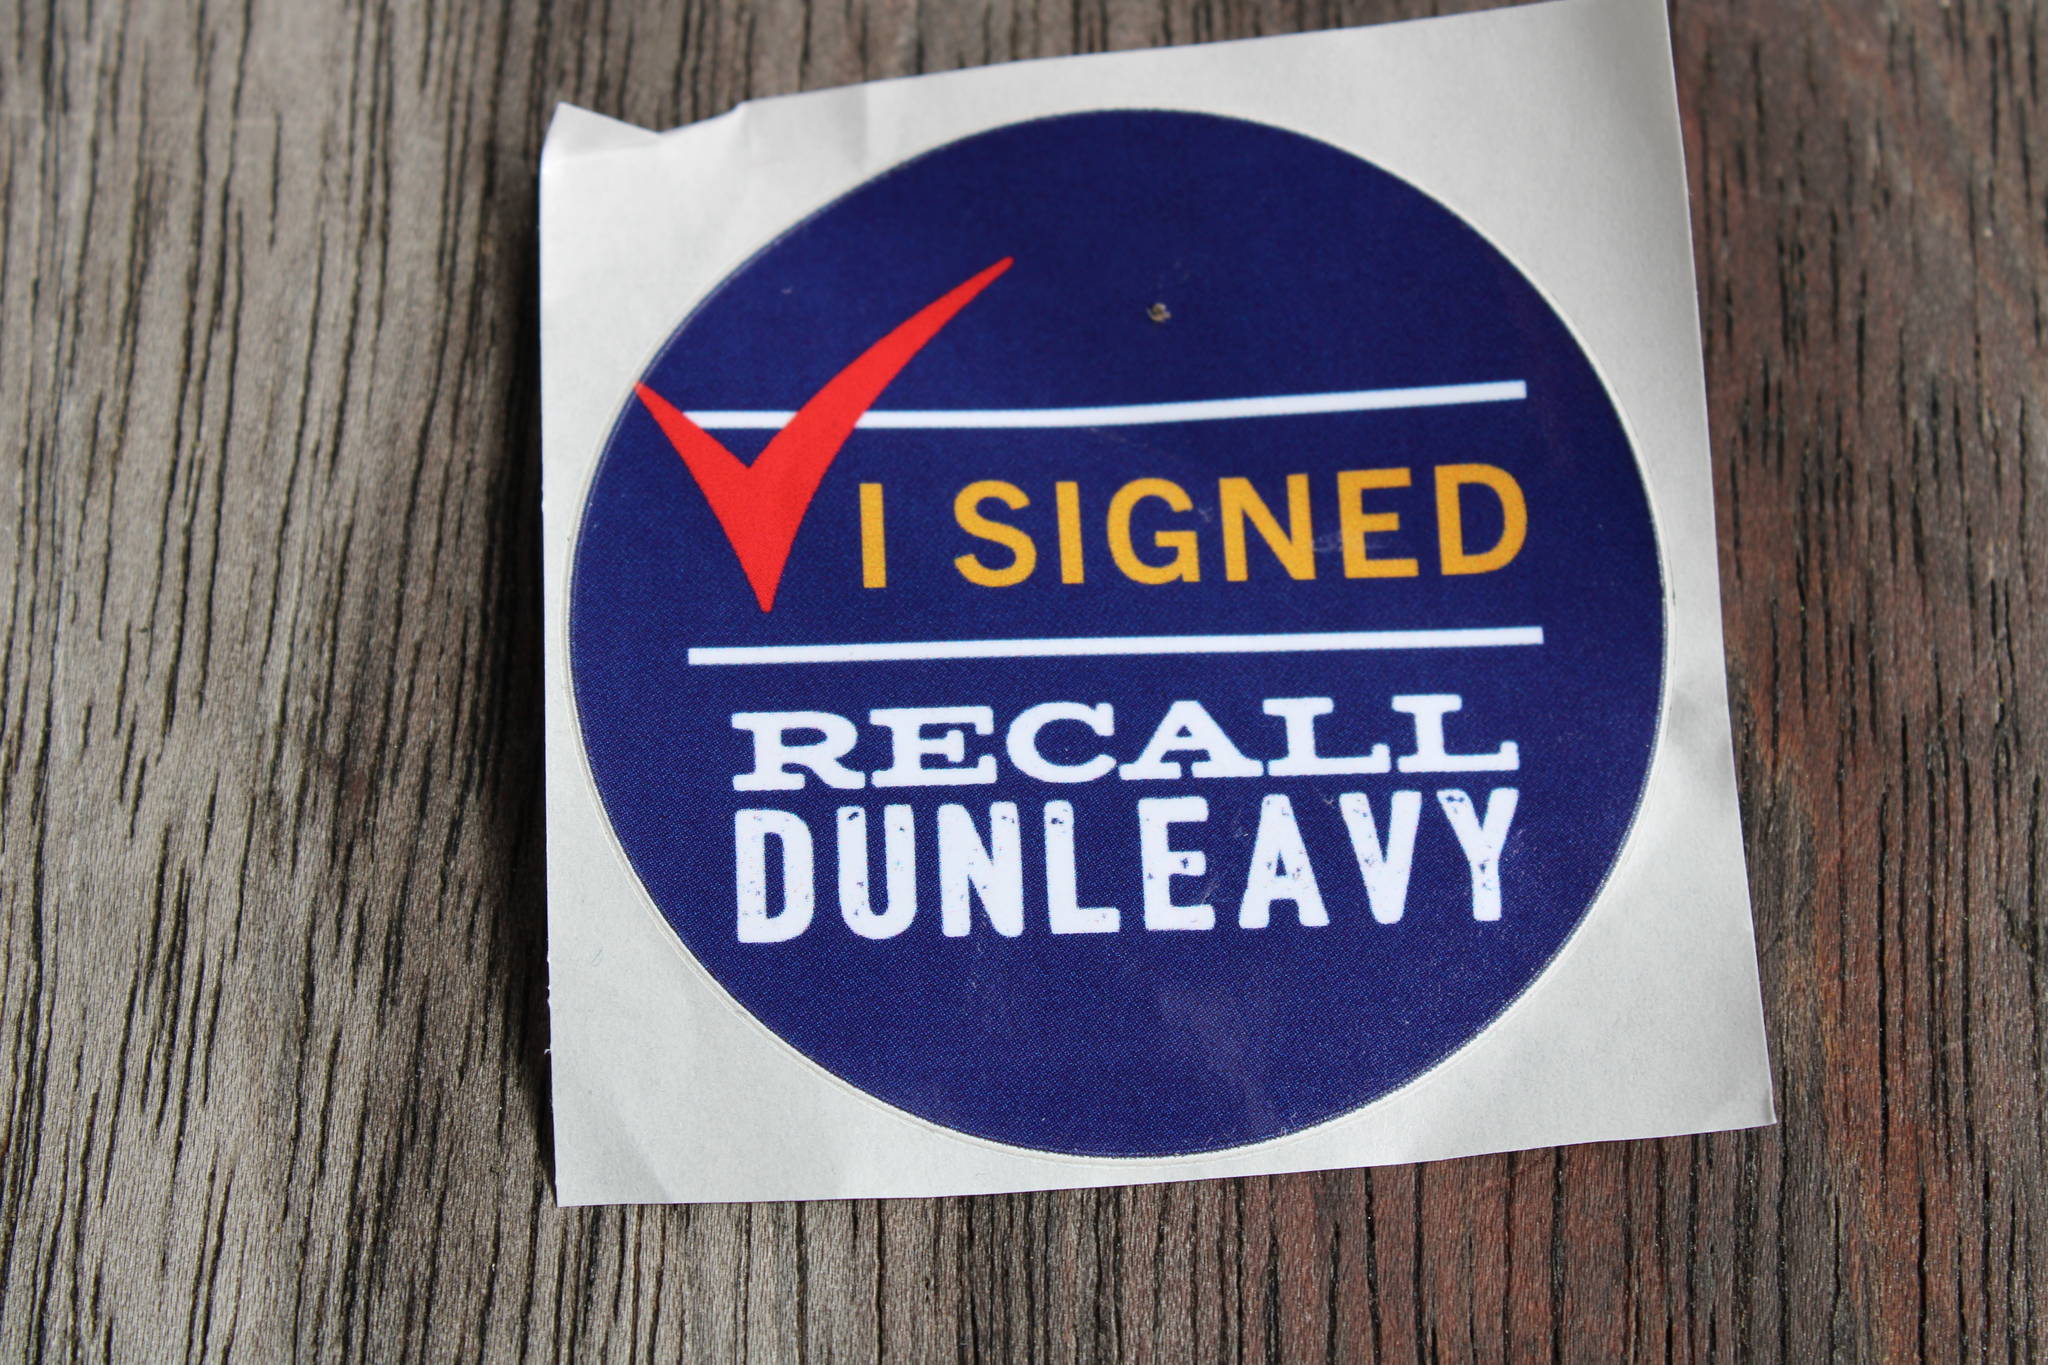 A group seeking Gov. Mike Dunleavy’s ouster has yet to collect the necessary signatures to force a recall election. (Ben Hohenstatt / Juneau Empire File)